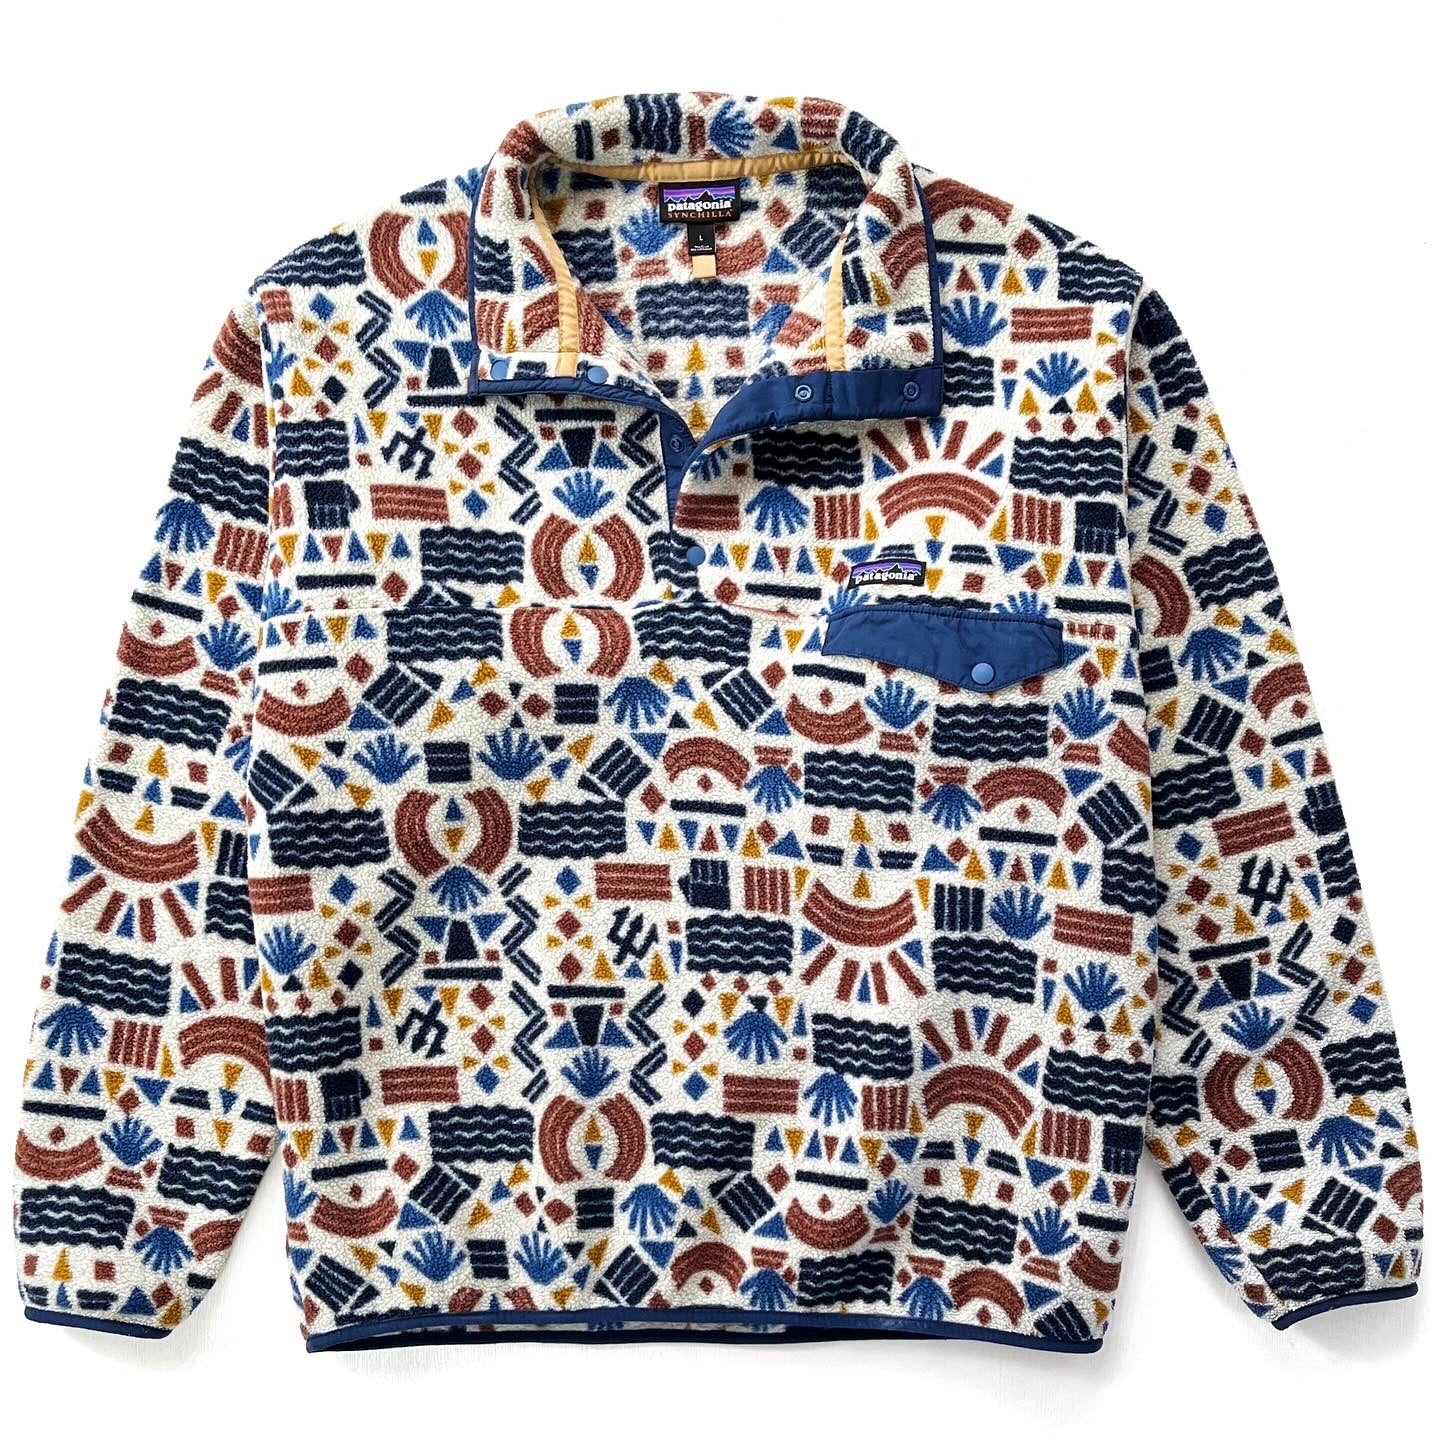 2019 Patagonia Printed Synchilla Snap-T, Protected Peaks: Multi (L)